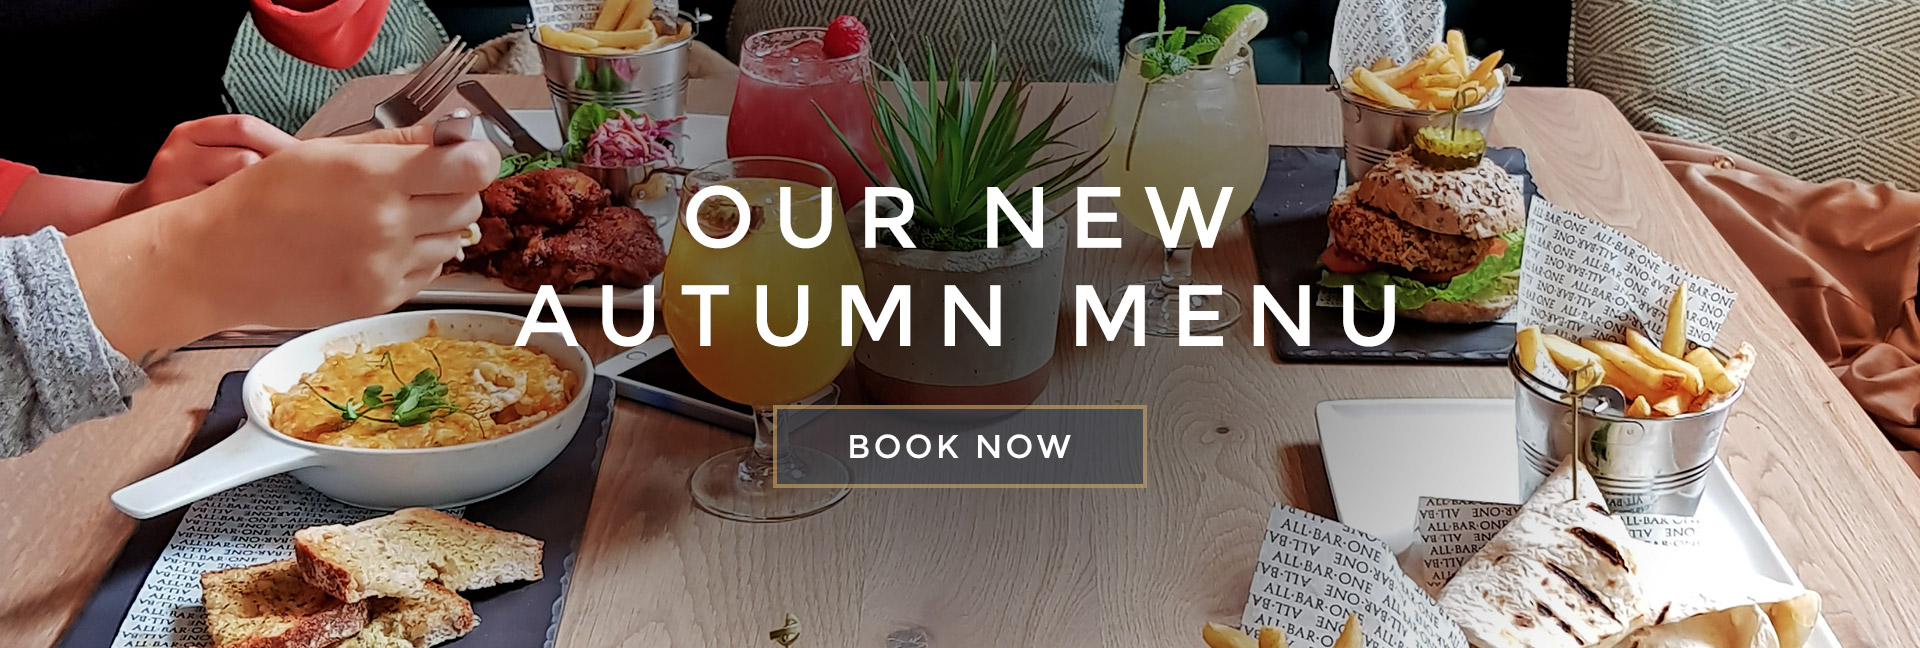 Our new Autumn menu at All Bar One Picton Place - Book now